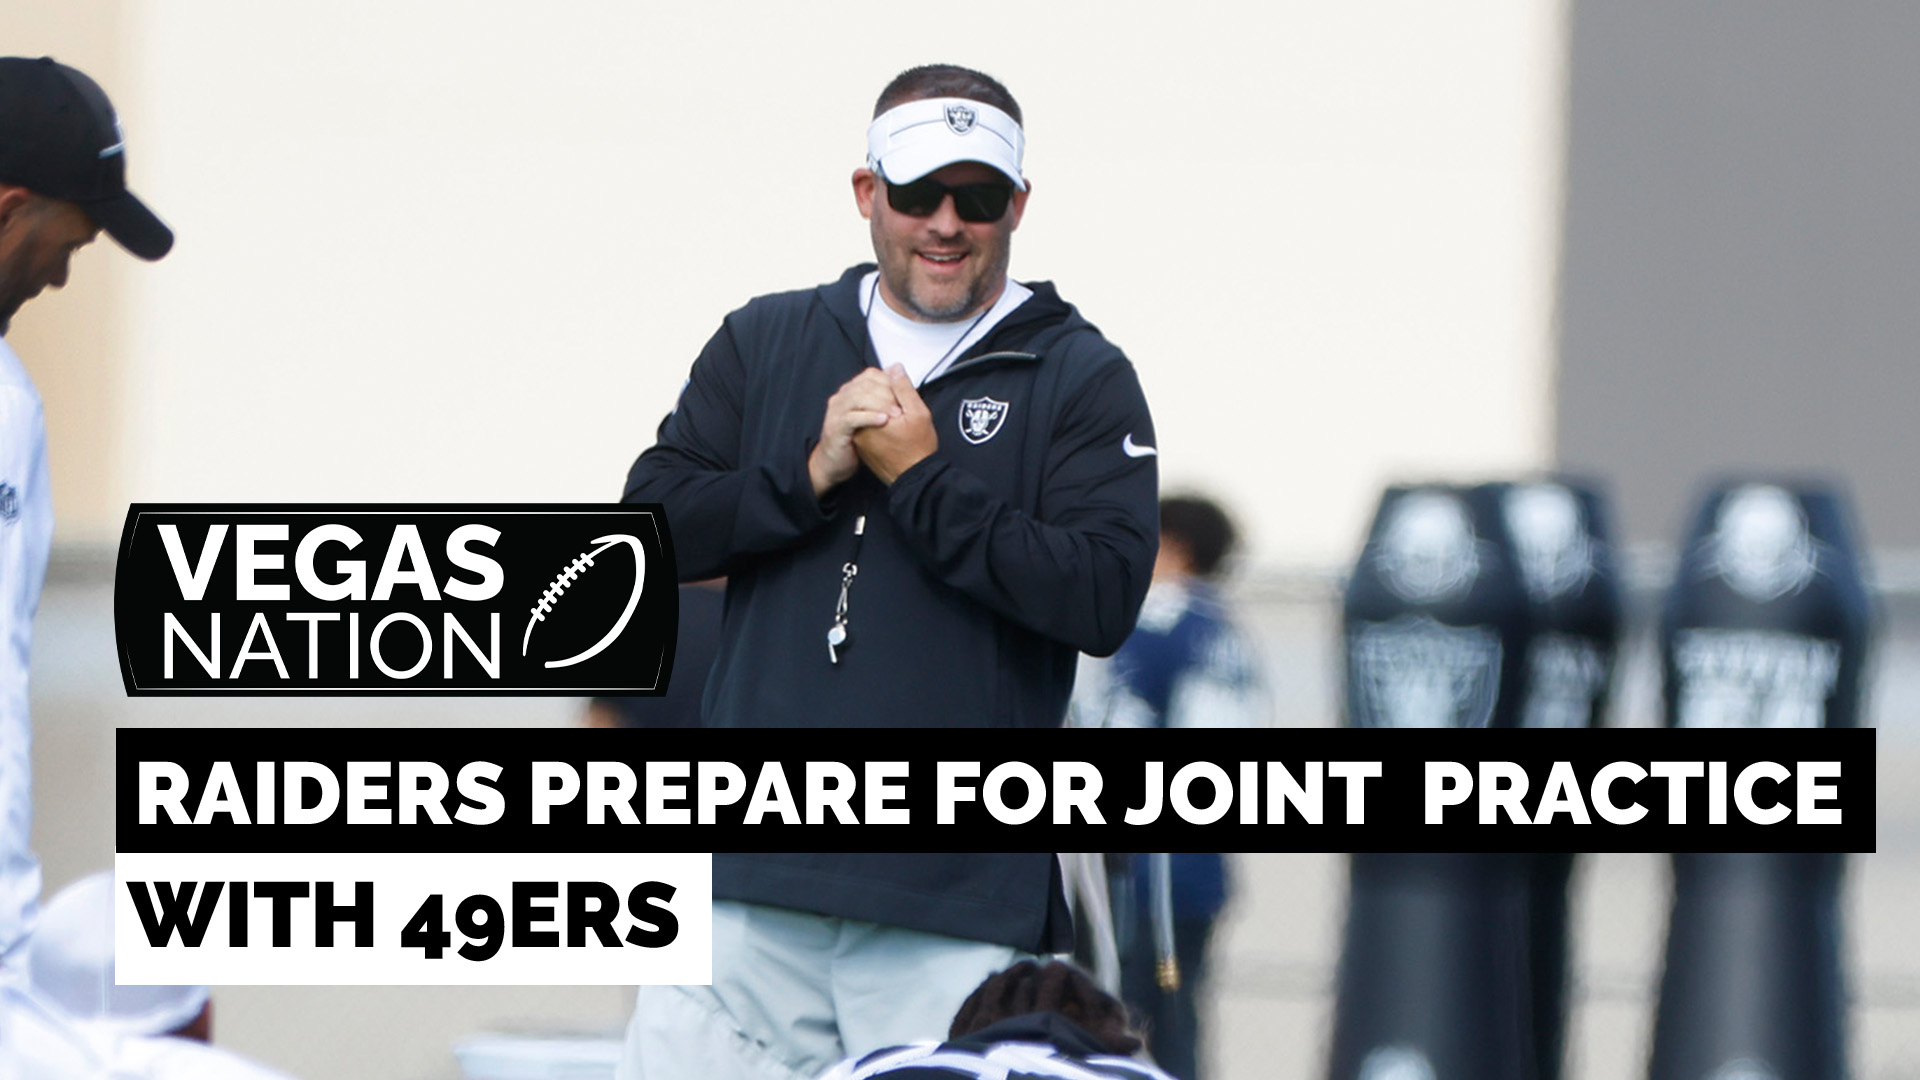 Raiders prepare for joint practice with 49ers